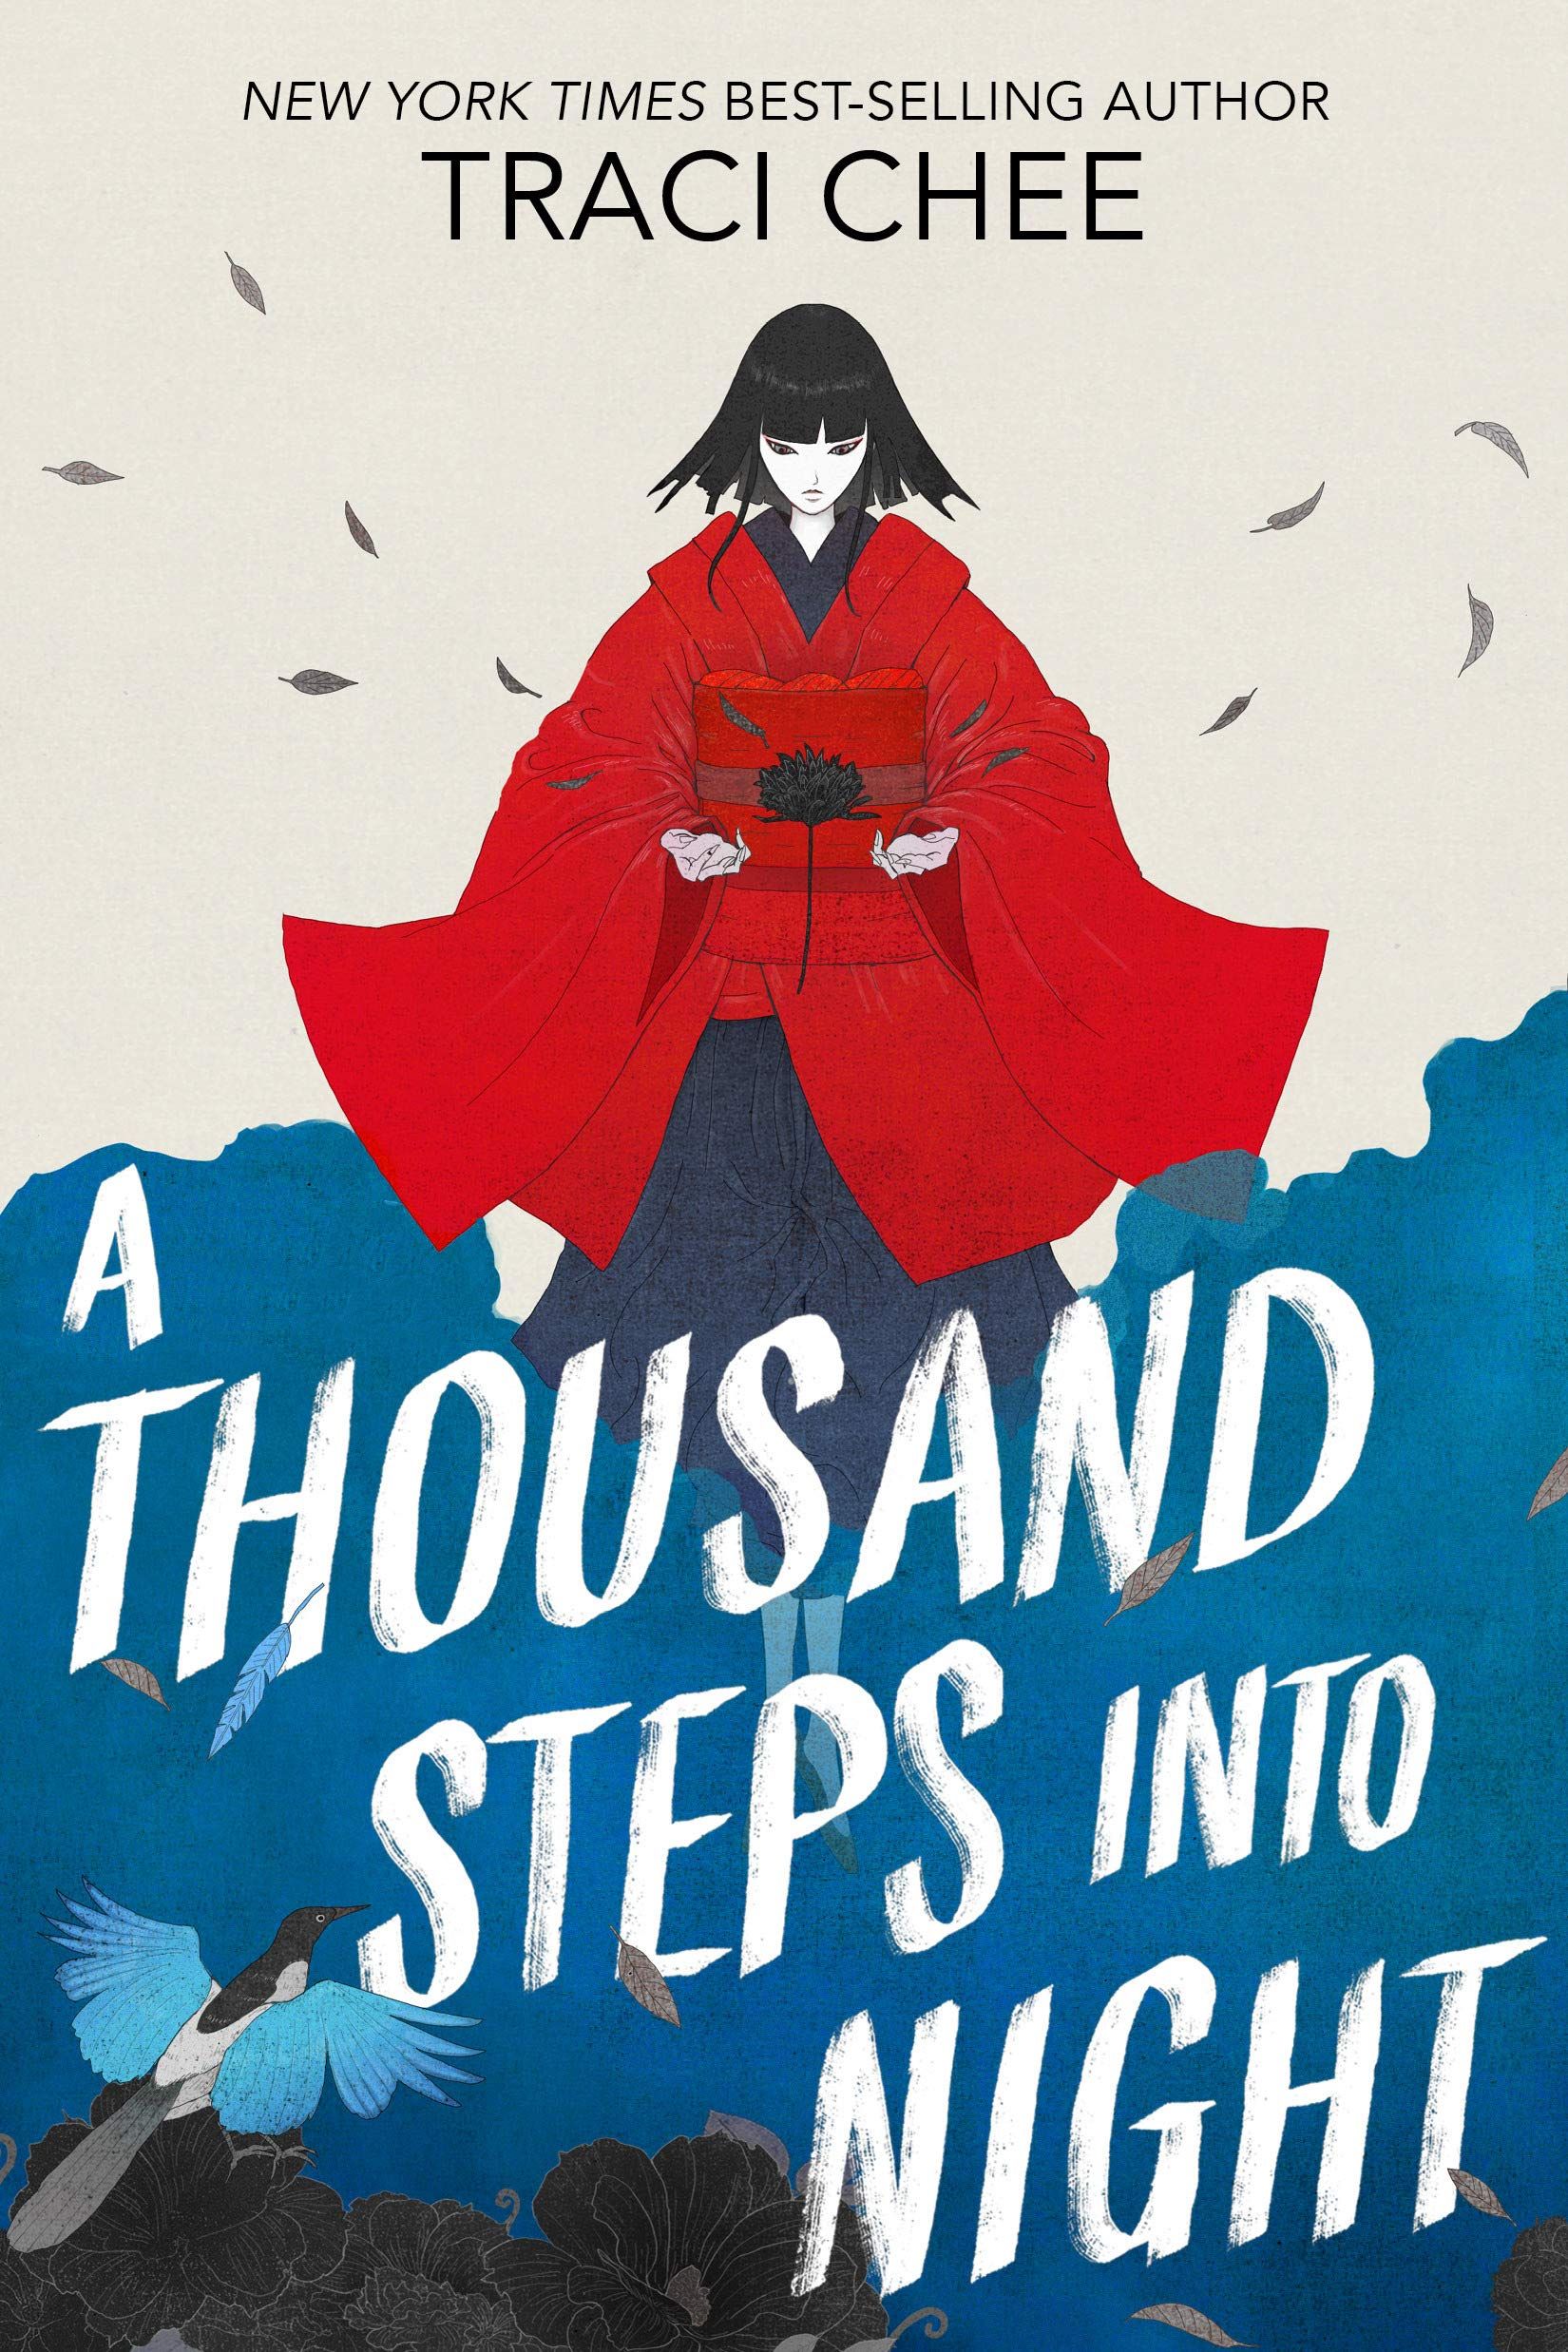 a thousand steps into night book cover